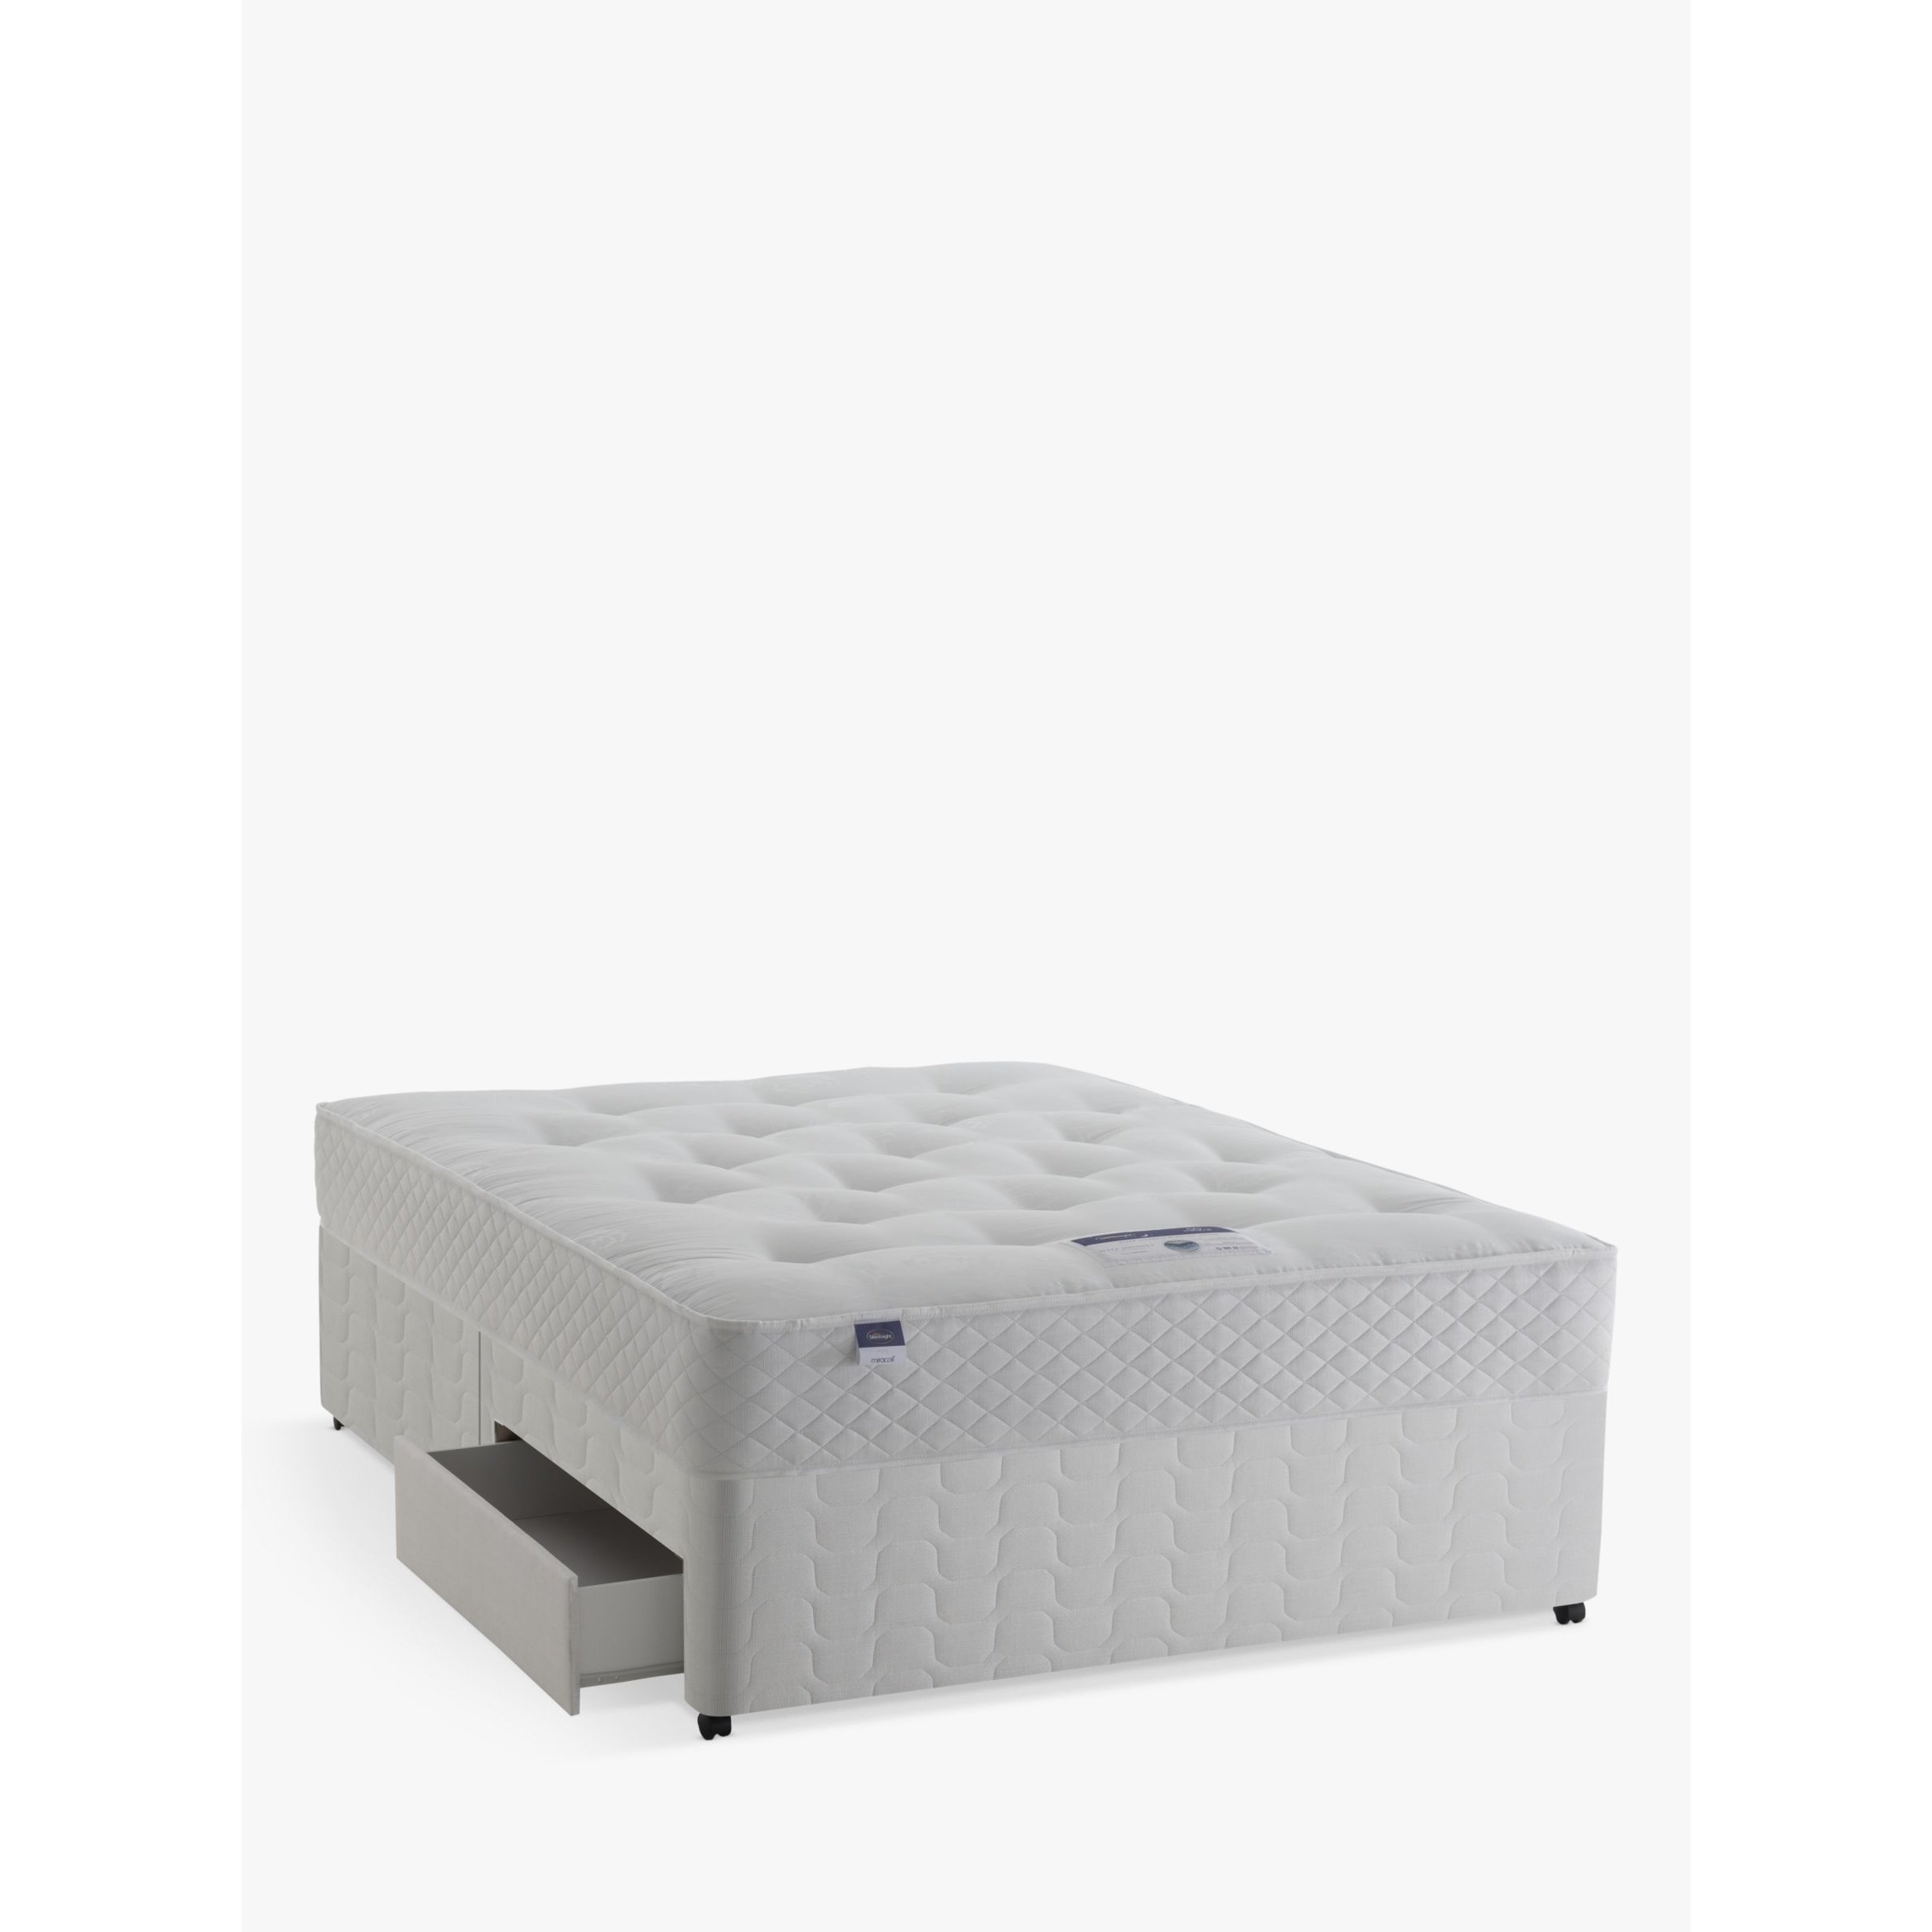 Silentnight Sleep Soundly Miracoil Ortho Divan Base and Mattress Set, Firm, Double